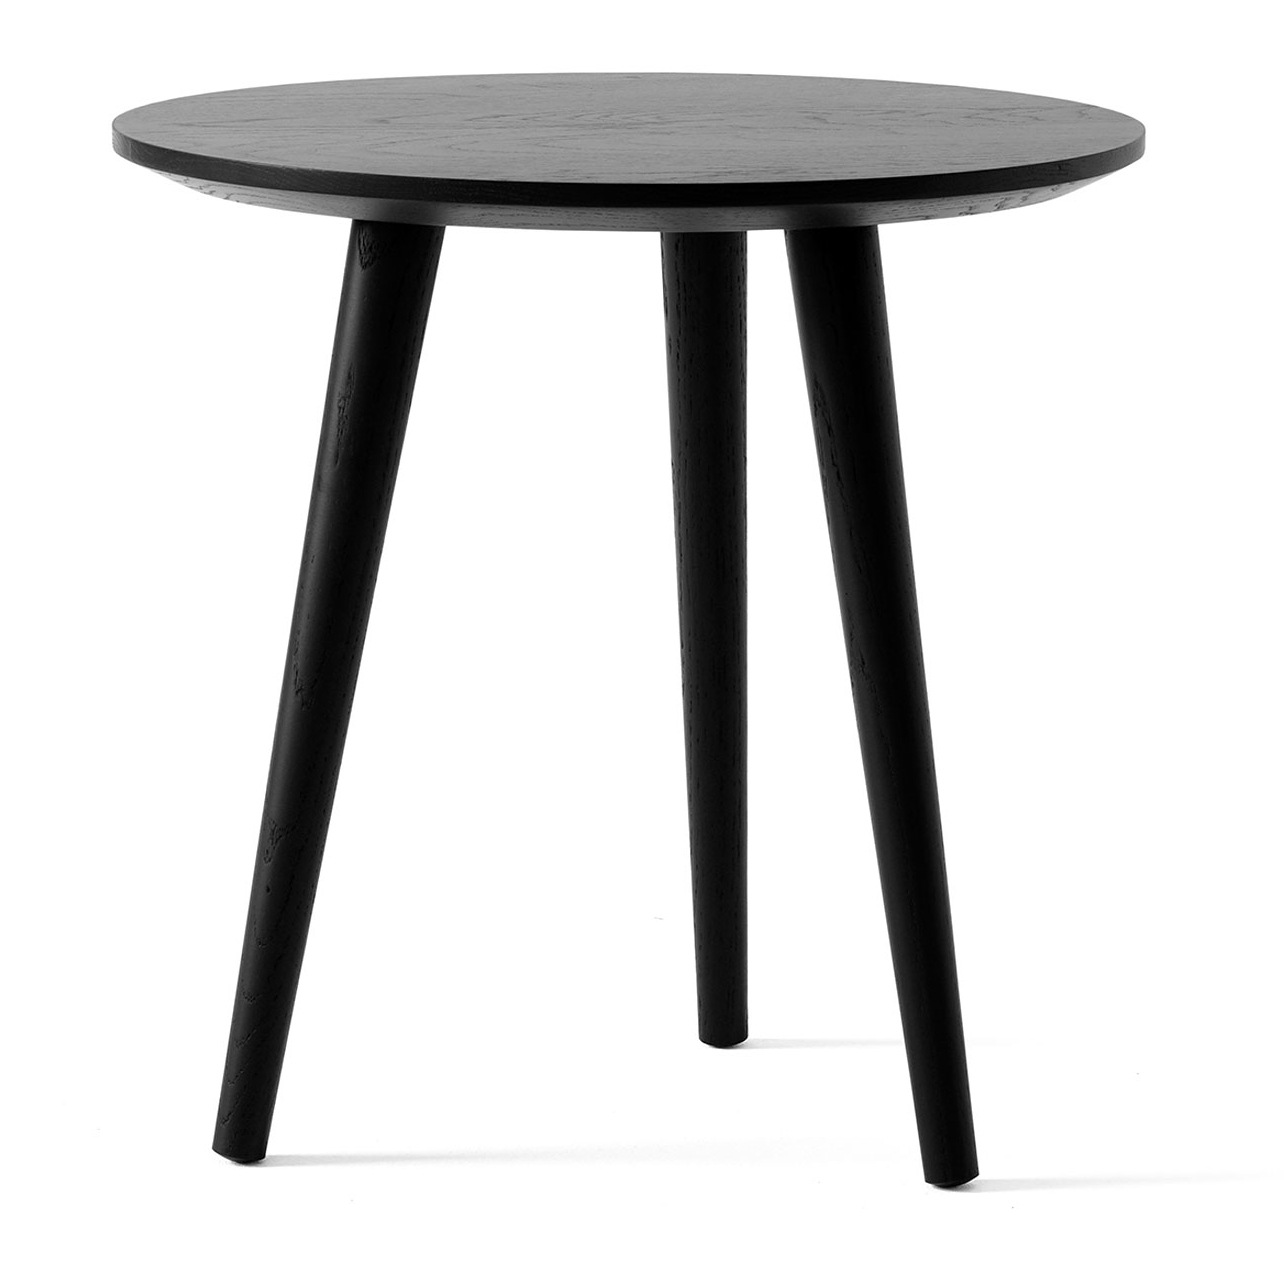 In Between SK13 Coffee Table 48cm, Black Lacquered Oak